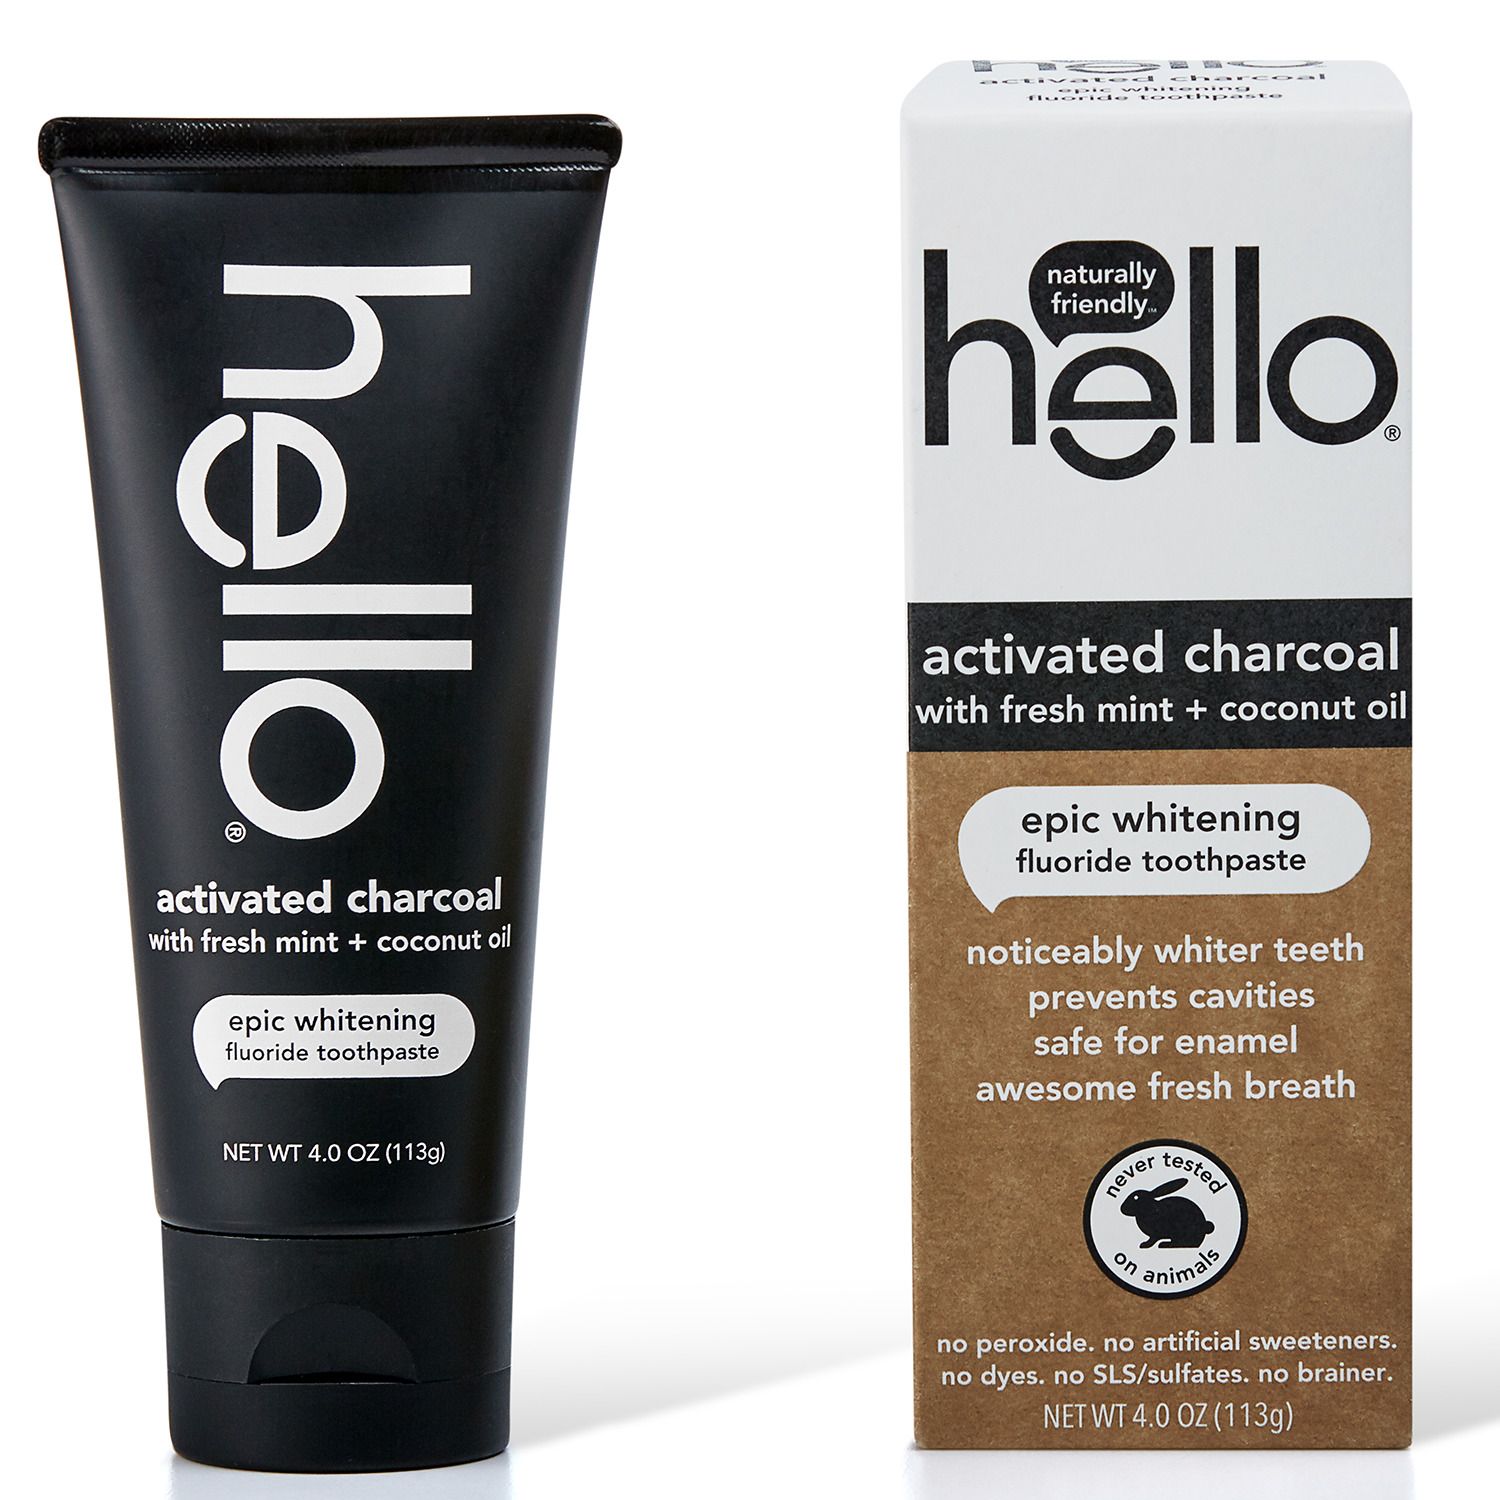 Image for hello Activated Charcoal Epic Whitening Fluoride Toothpaste at Kohl's.